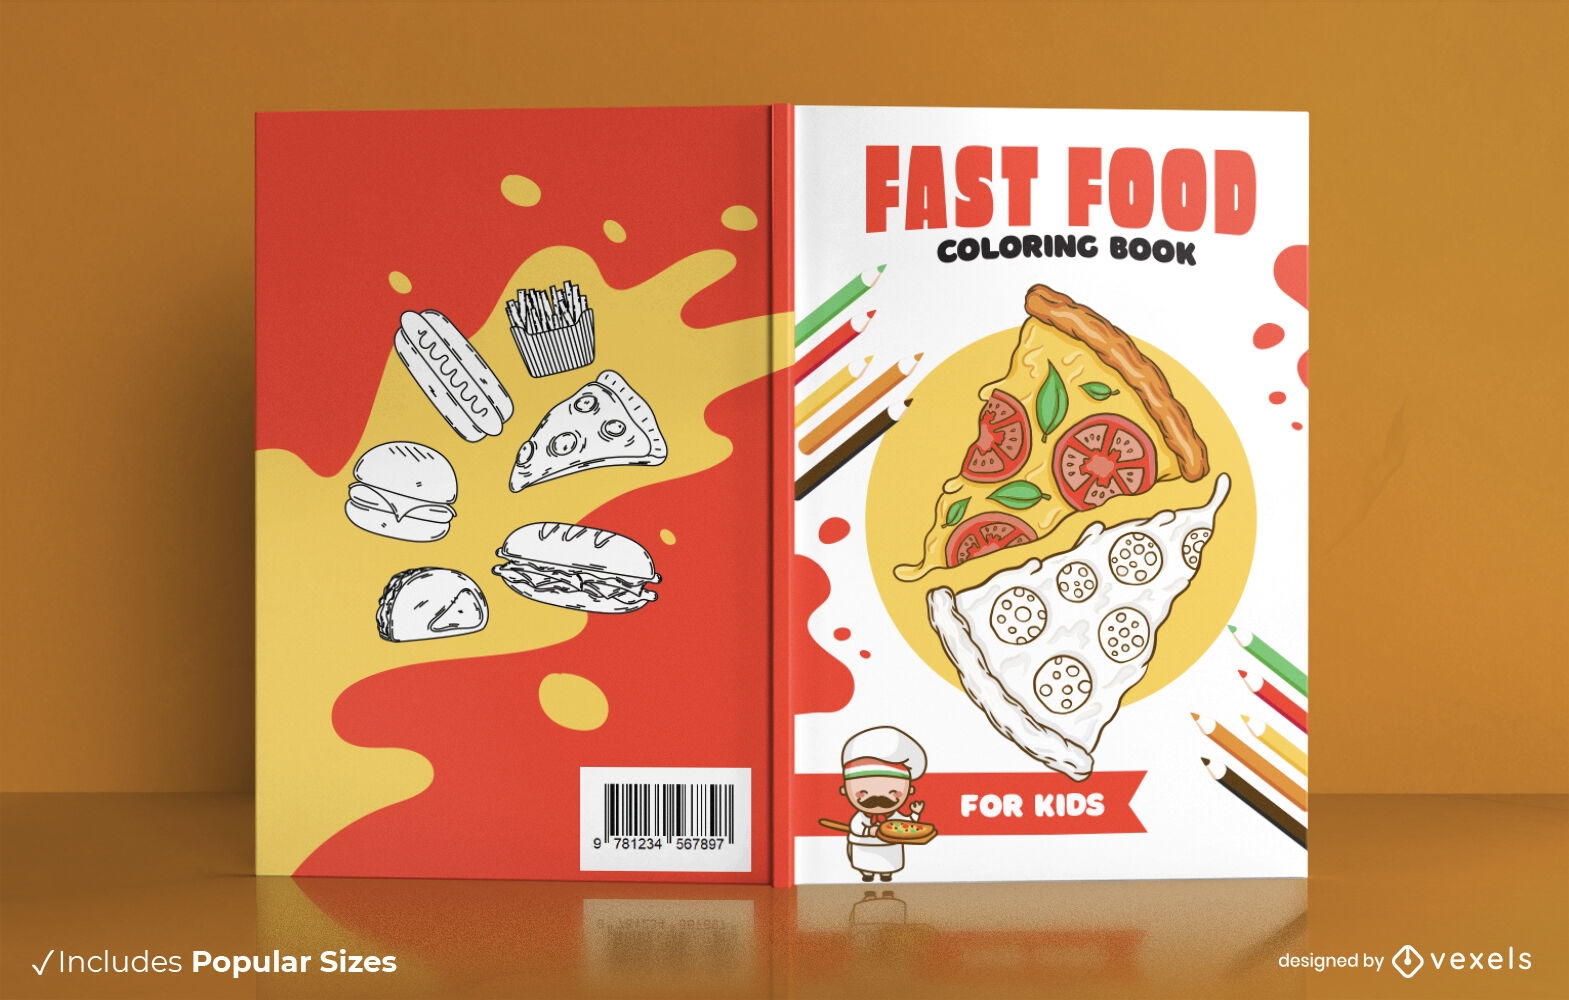 Fast food coloring book cover design